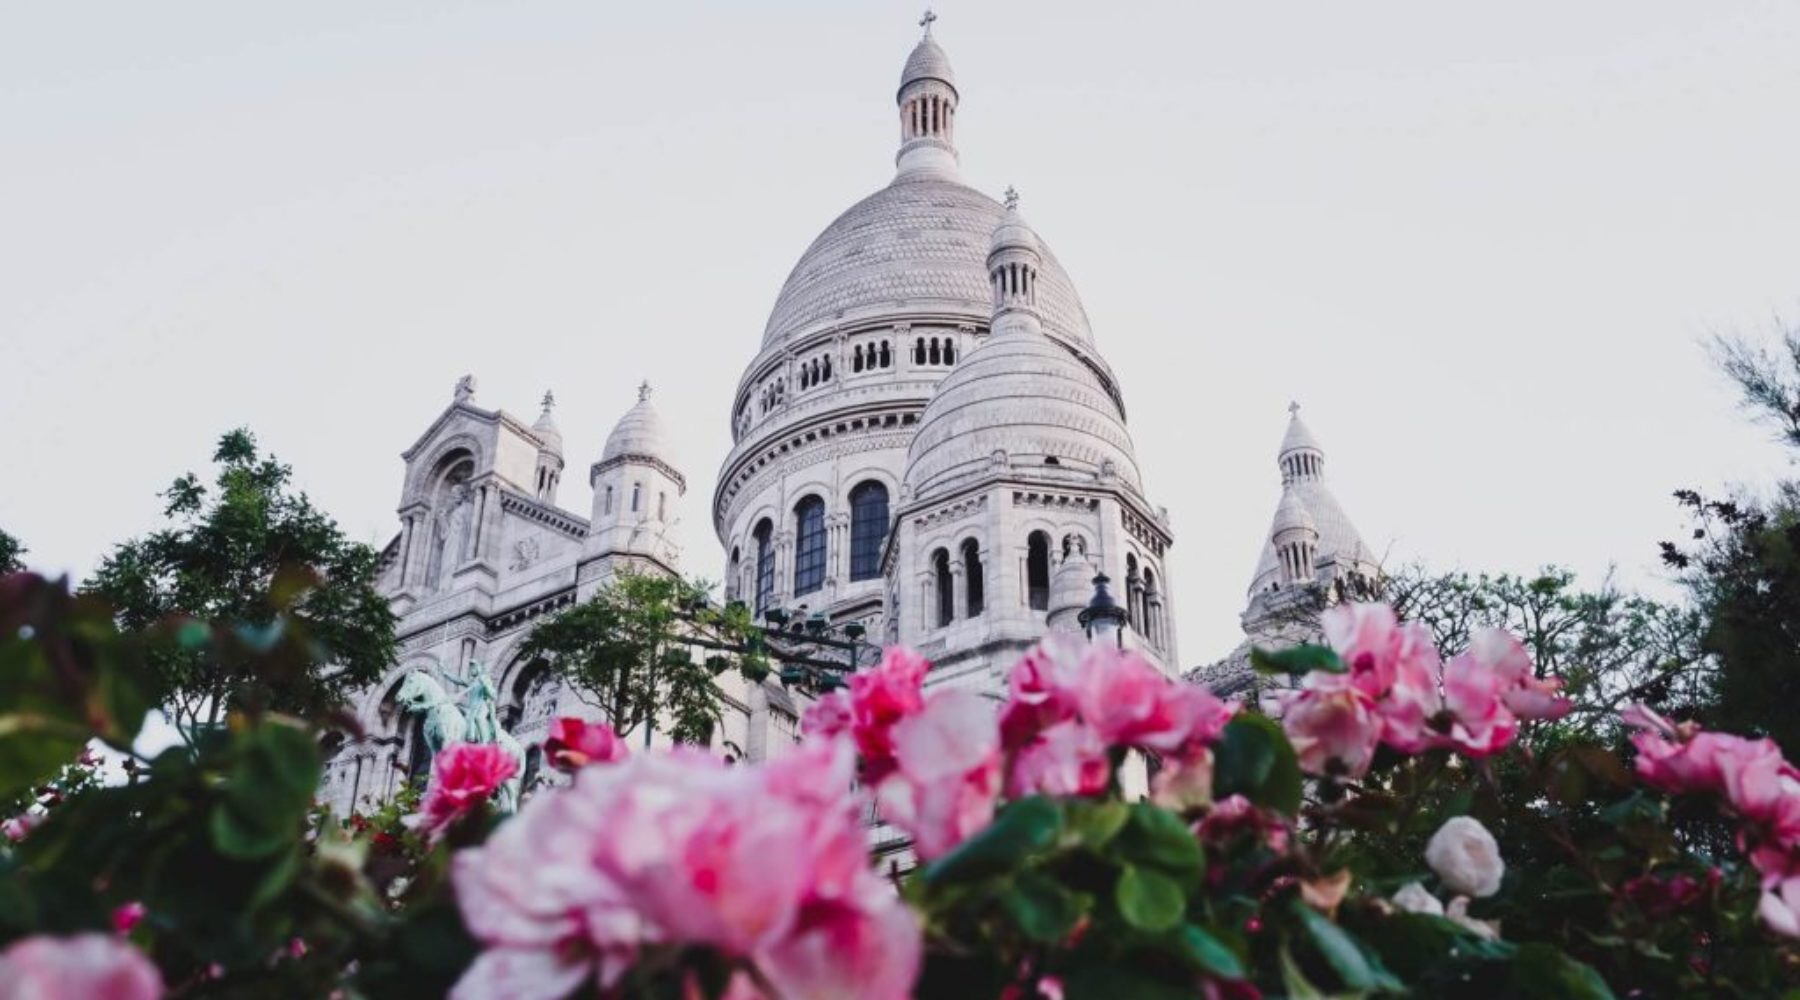 A guide to Montmartre in Paris